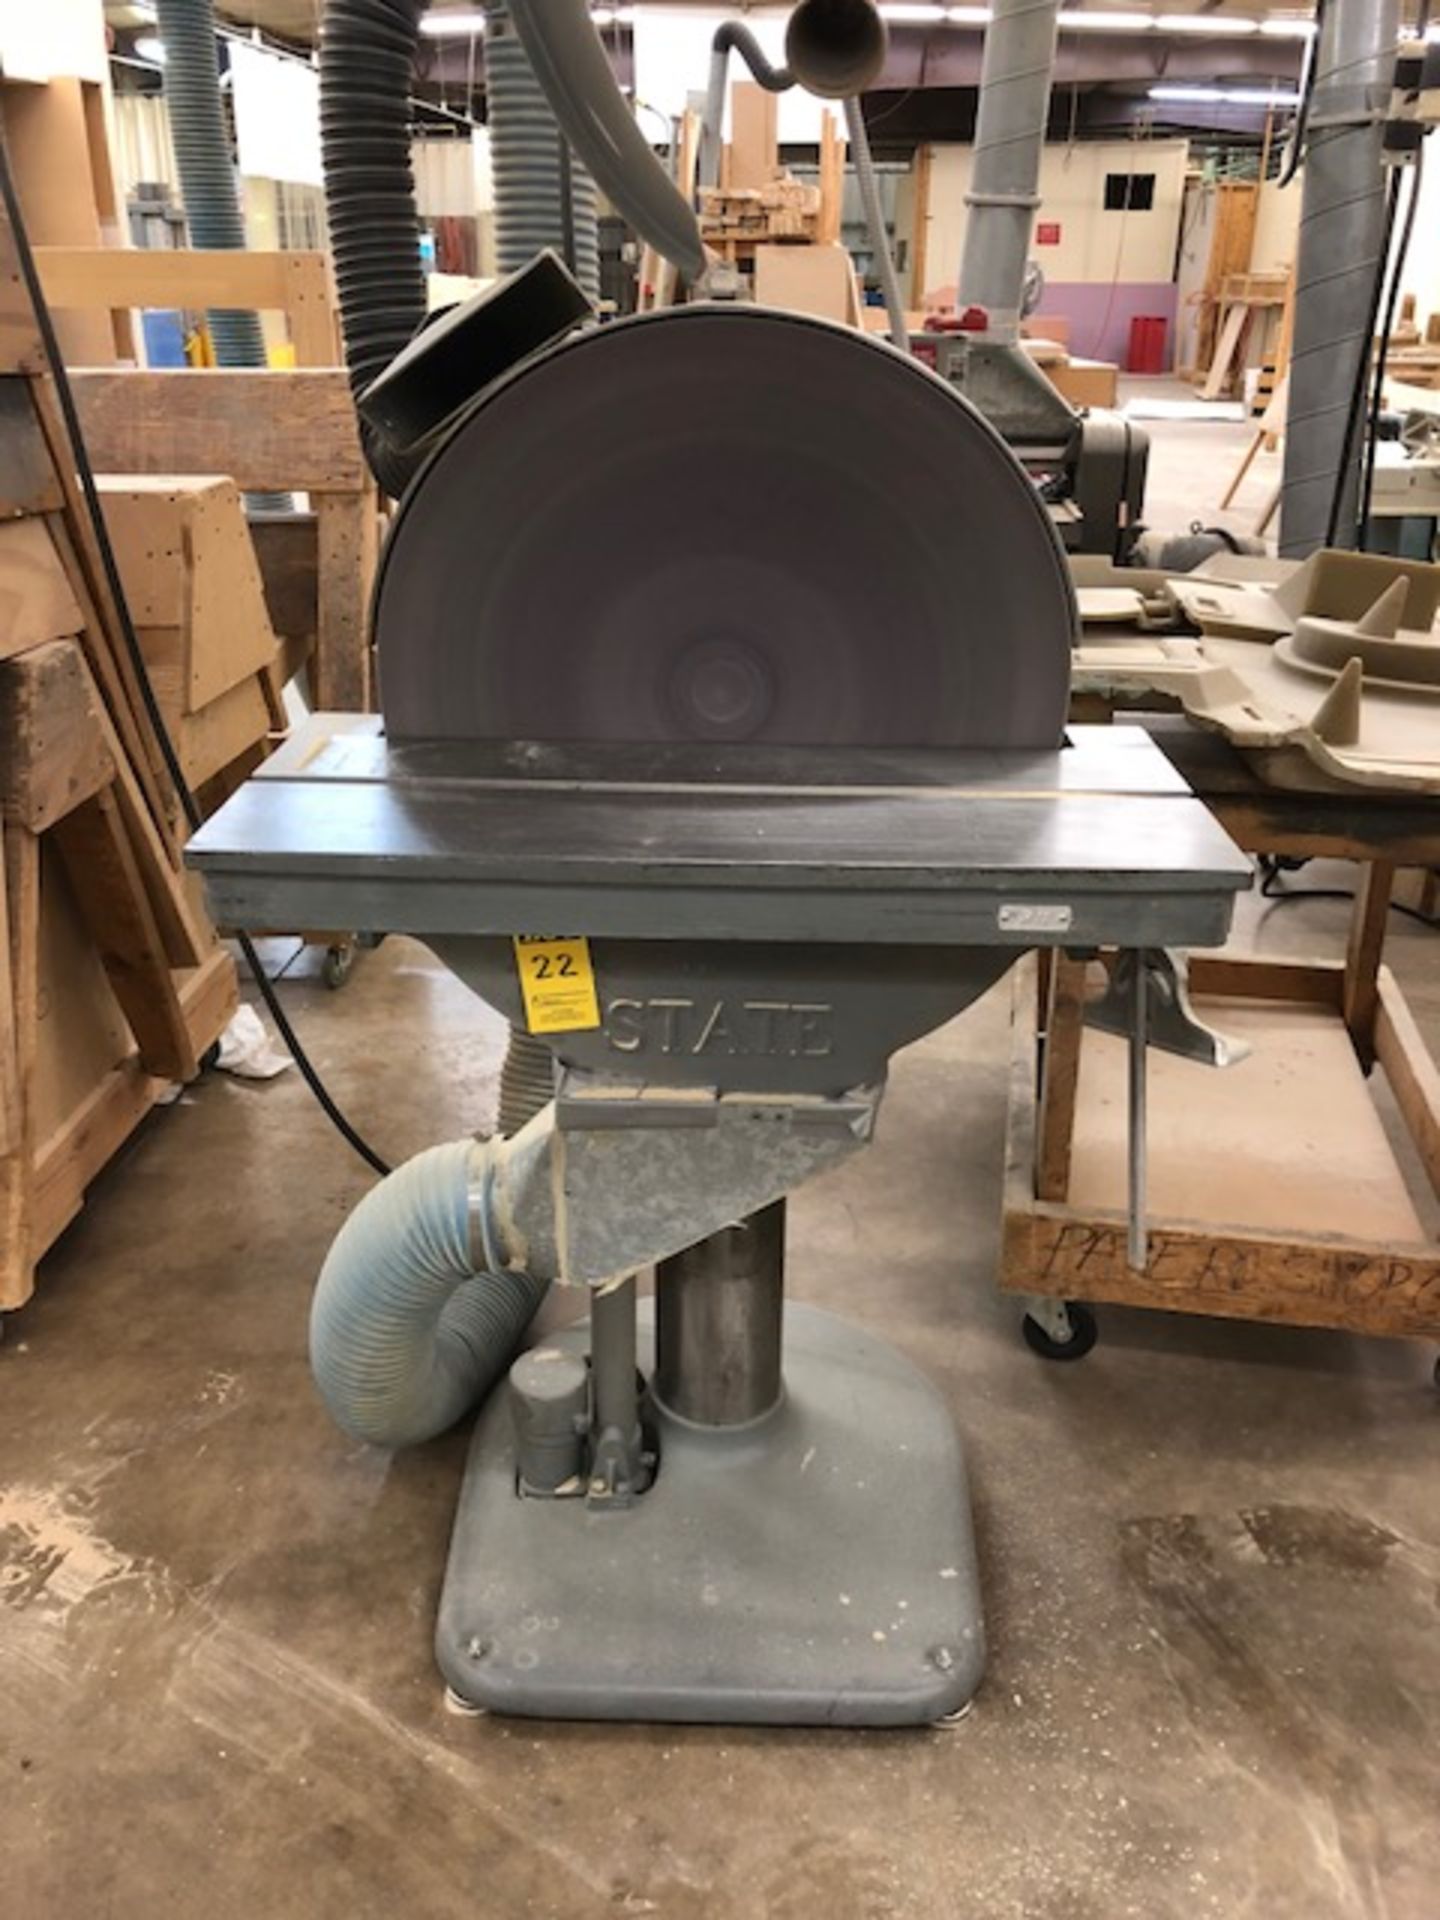 State d24 24" single end disc sander, 3 hp - removal available October 26, 2018